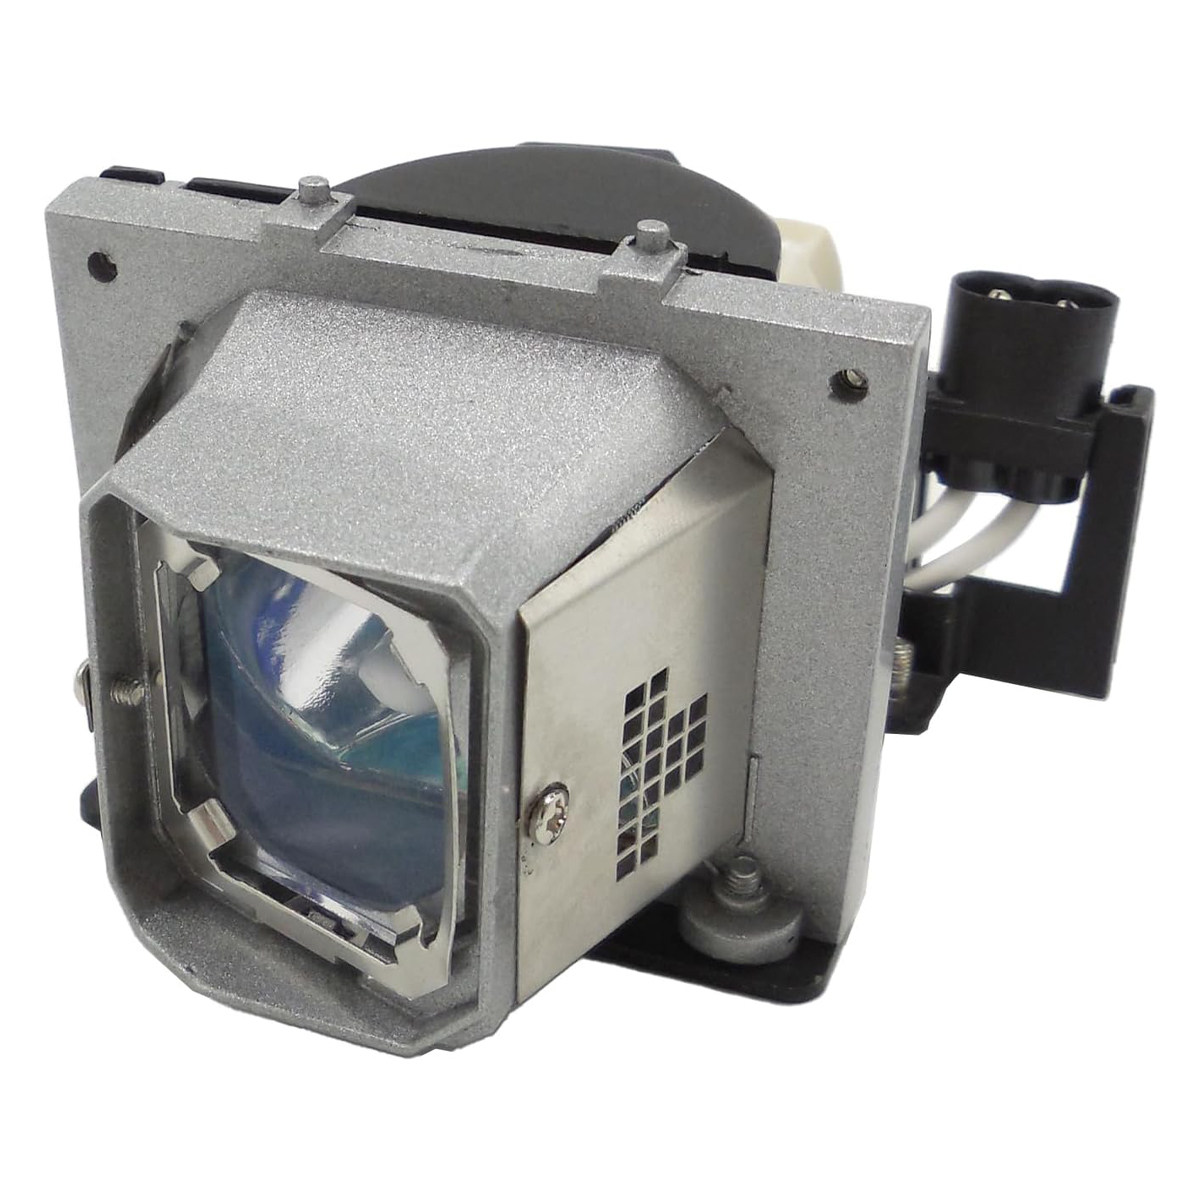 Replacement Projector lamp M209X311-8529725-10112 For DELL M209X